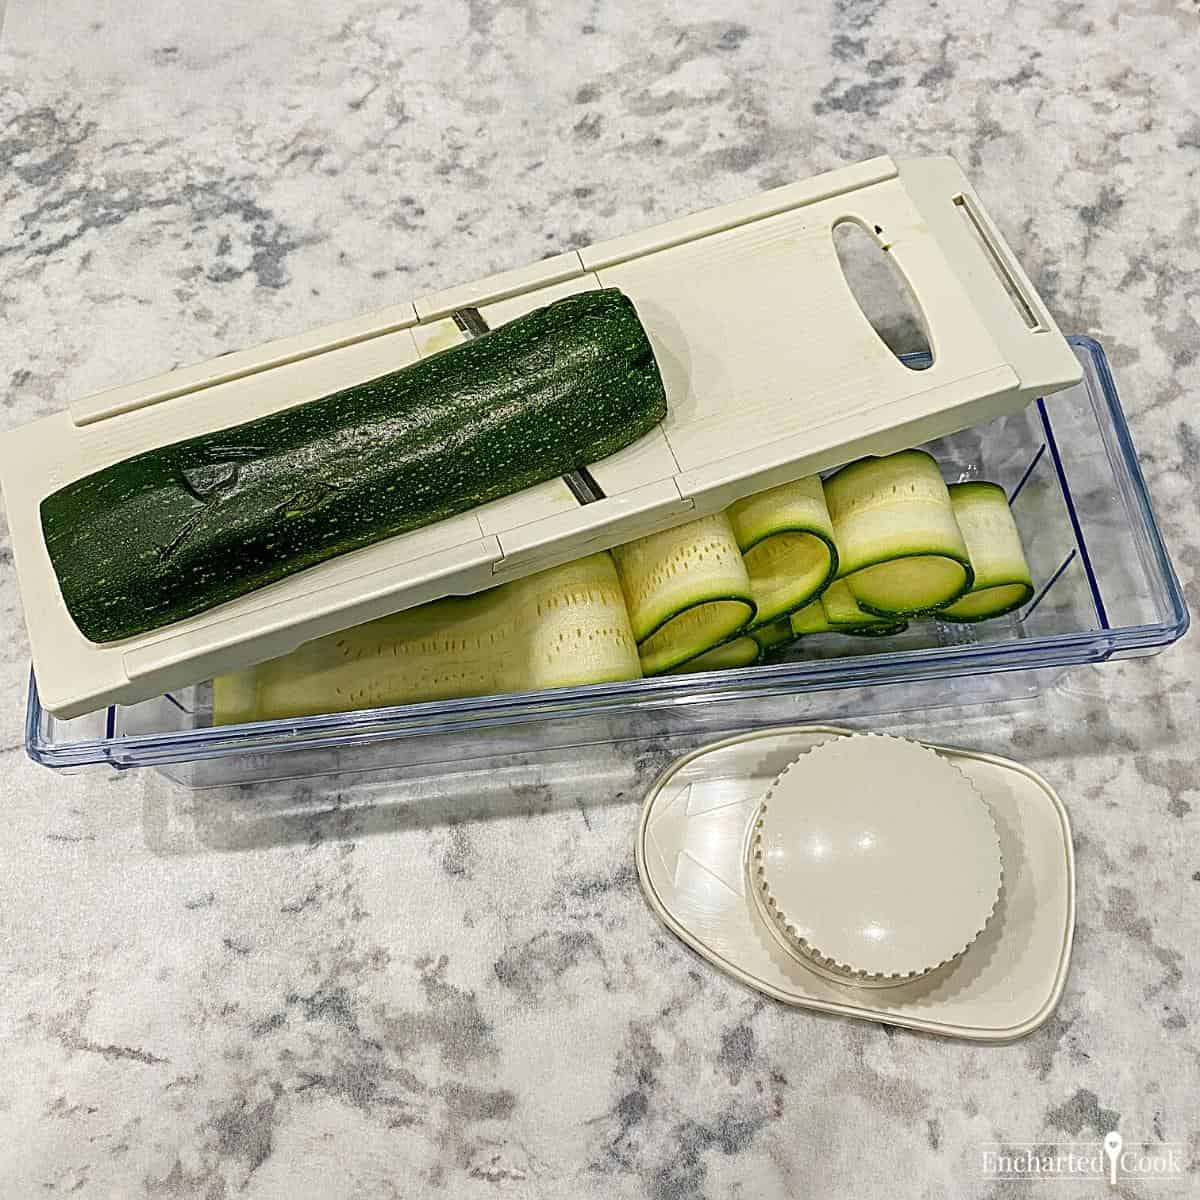 A zucchini squash being sliced into ribbons using a mandoline slicer.